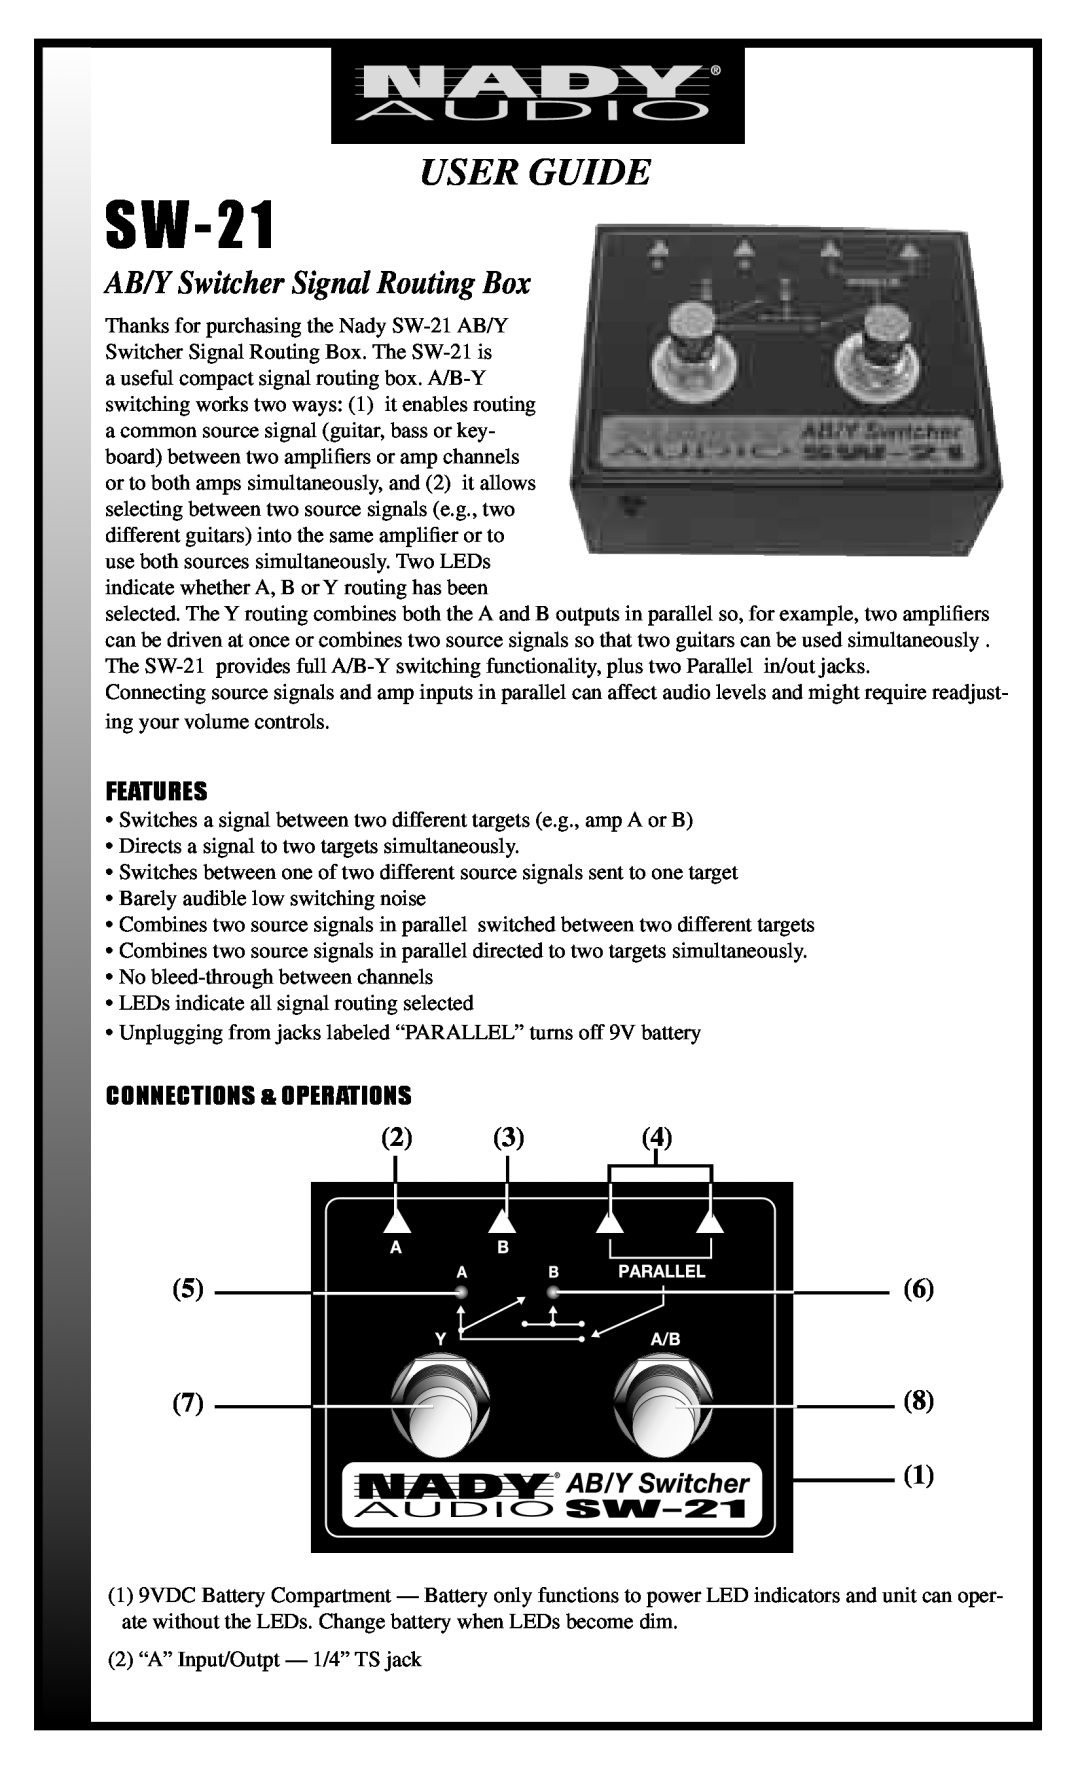 Nady Systems SW21 ABY manual Features, Connections & Operations, SW-21, User Guide, AB/Y Switcher Signal Routing Box 